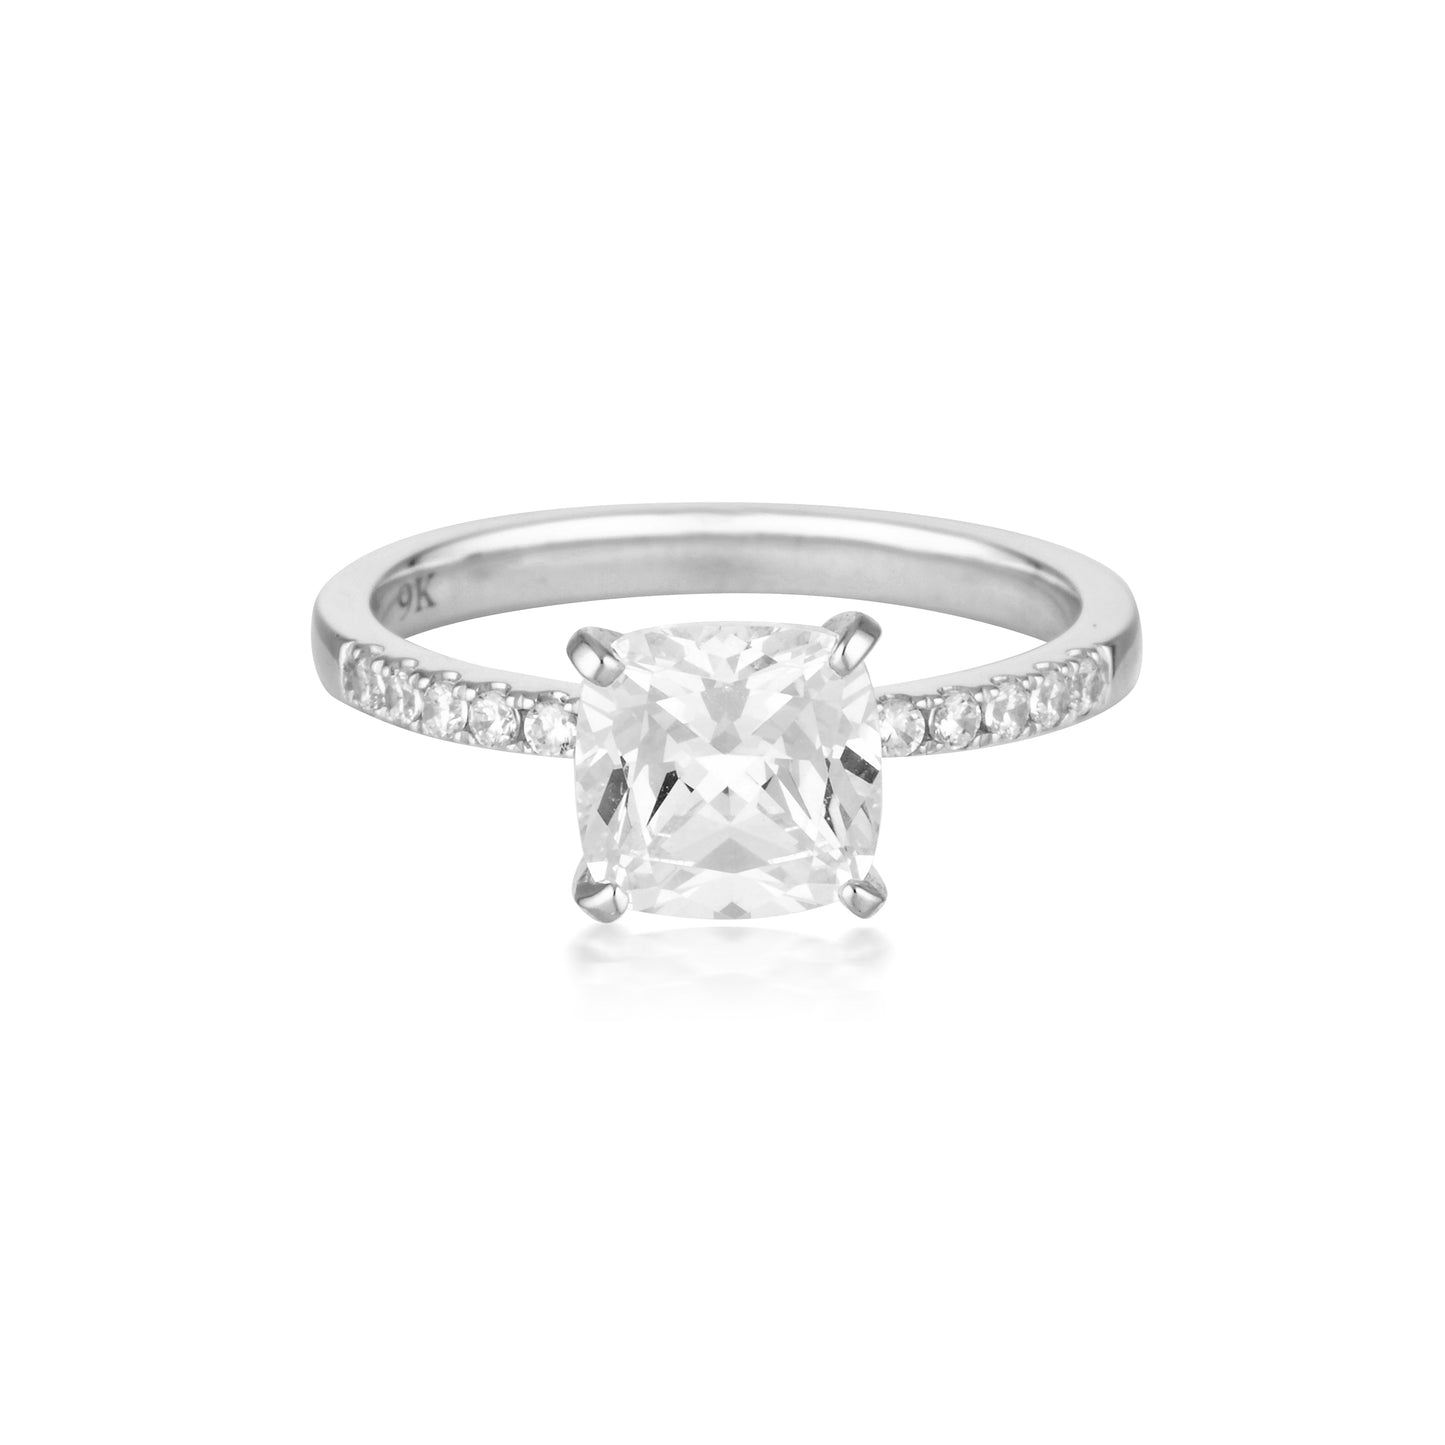 Georgini Gold Cushion Cut 1.5tcw Moissanite Engagement Ring in 9ct White Gold